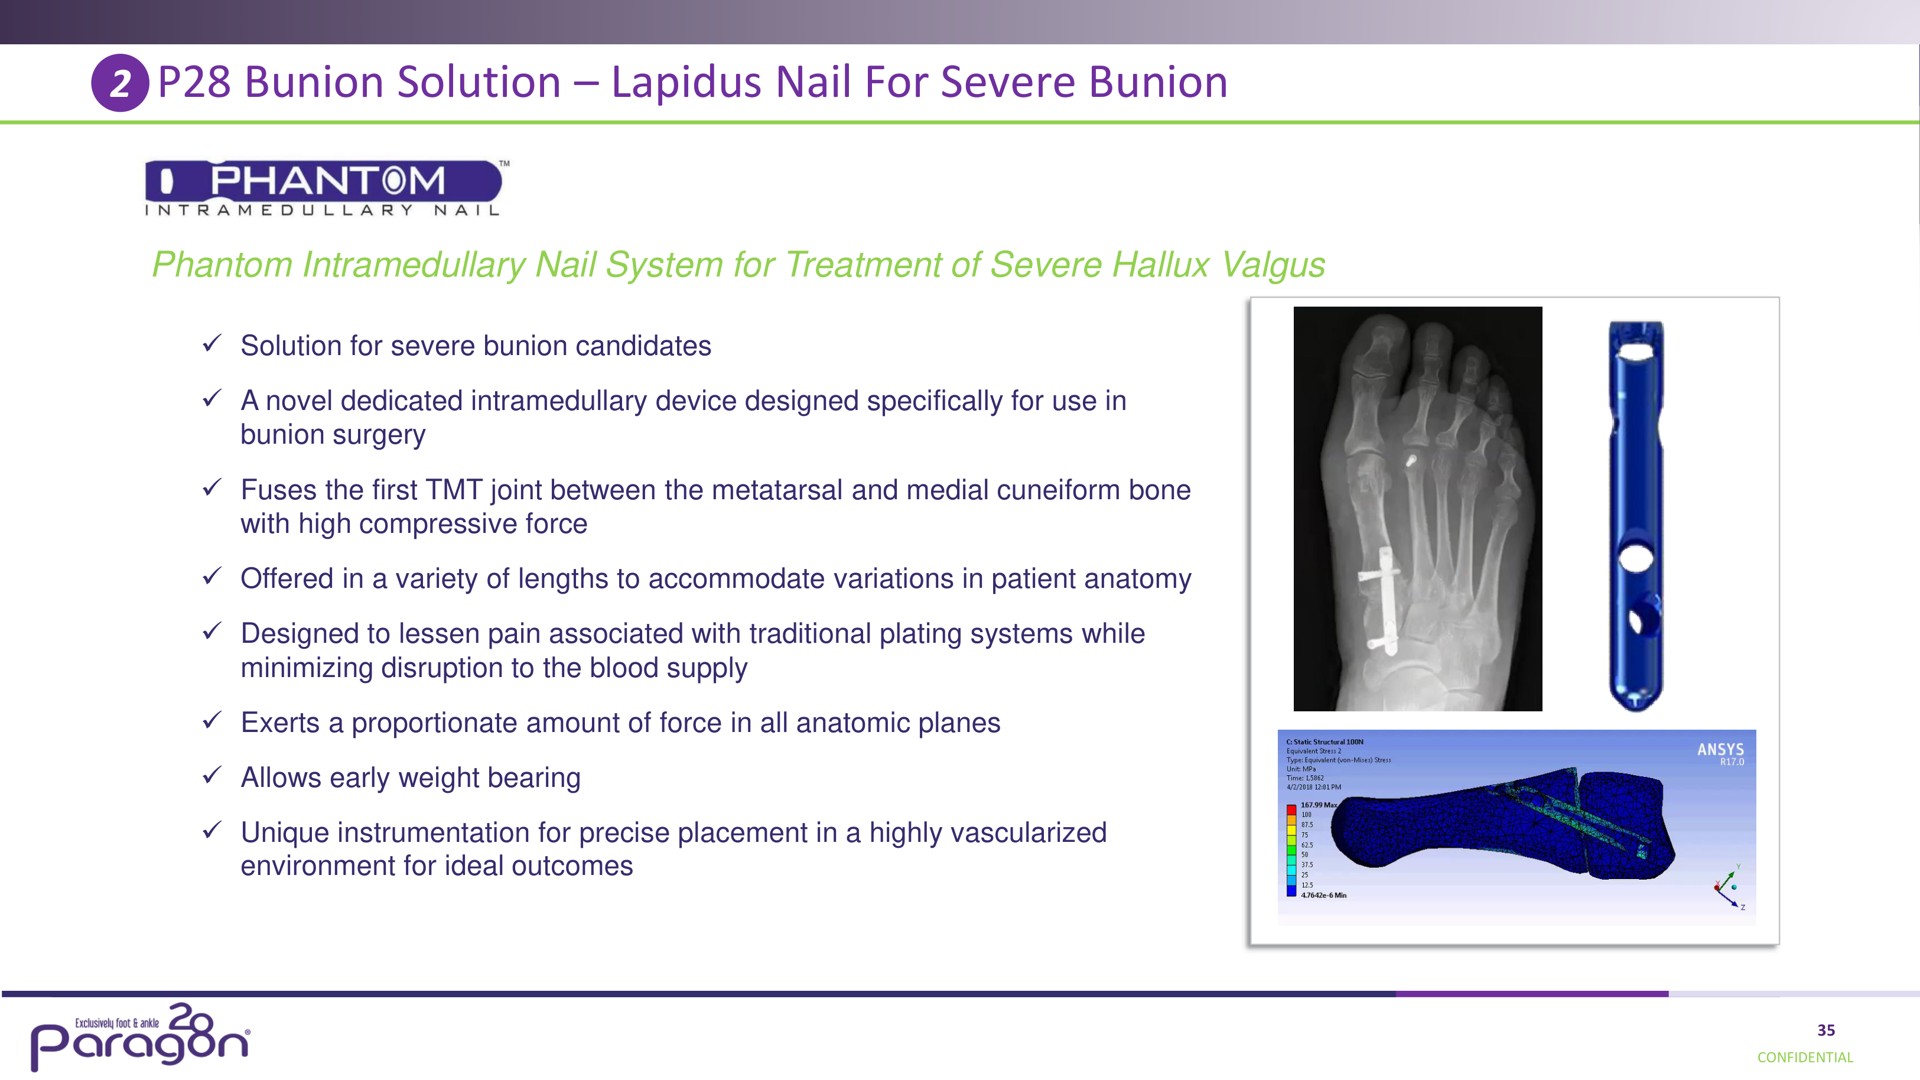 bunion solution nail for severe bunion ose | Paragon28